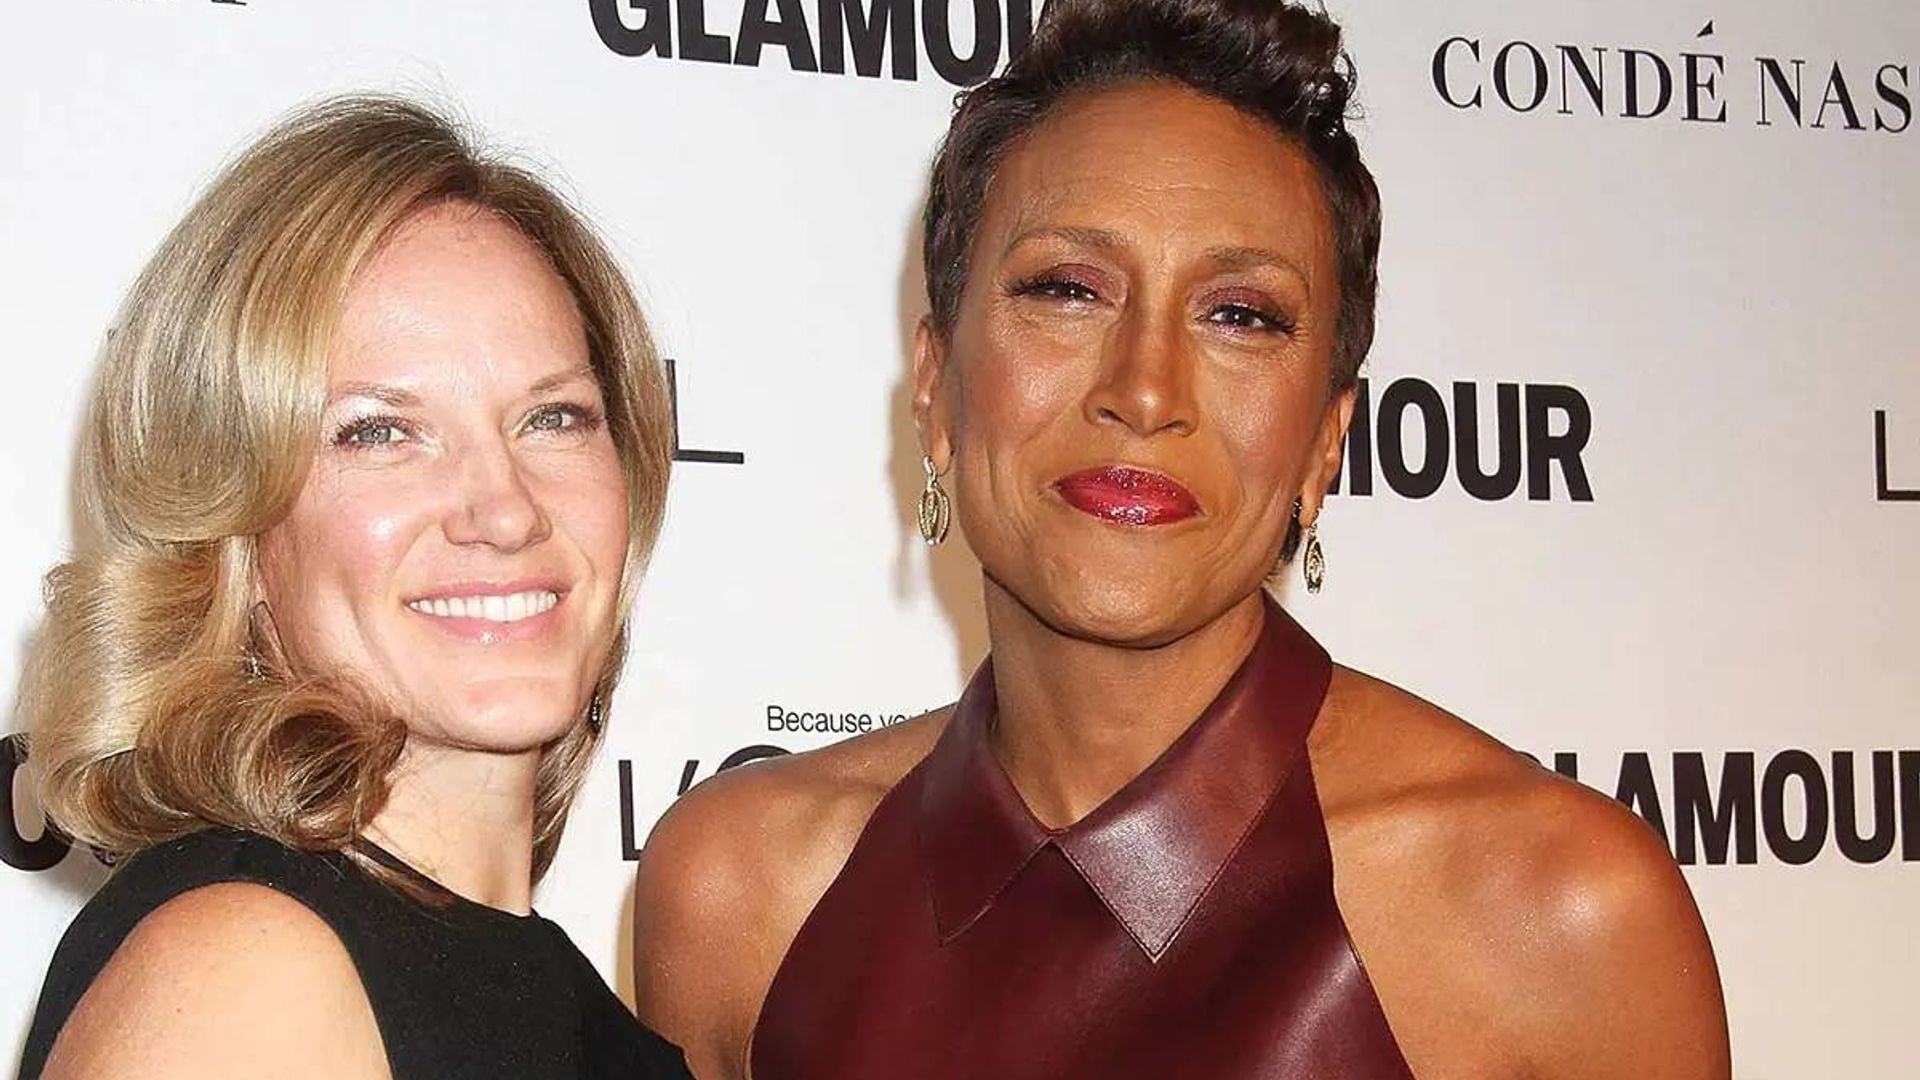 Exclusive: Robin Roberts and Amber Laign revamp NY home with help from GMA co-star Lara Spencer